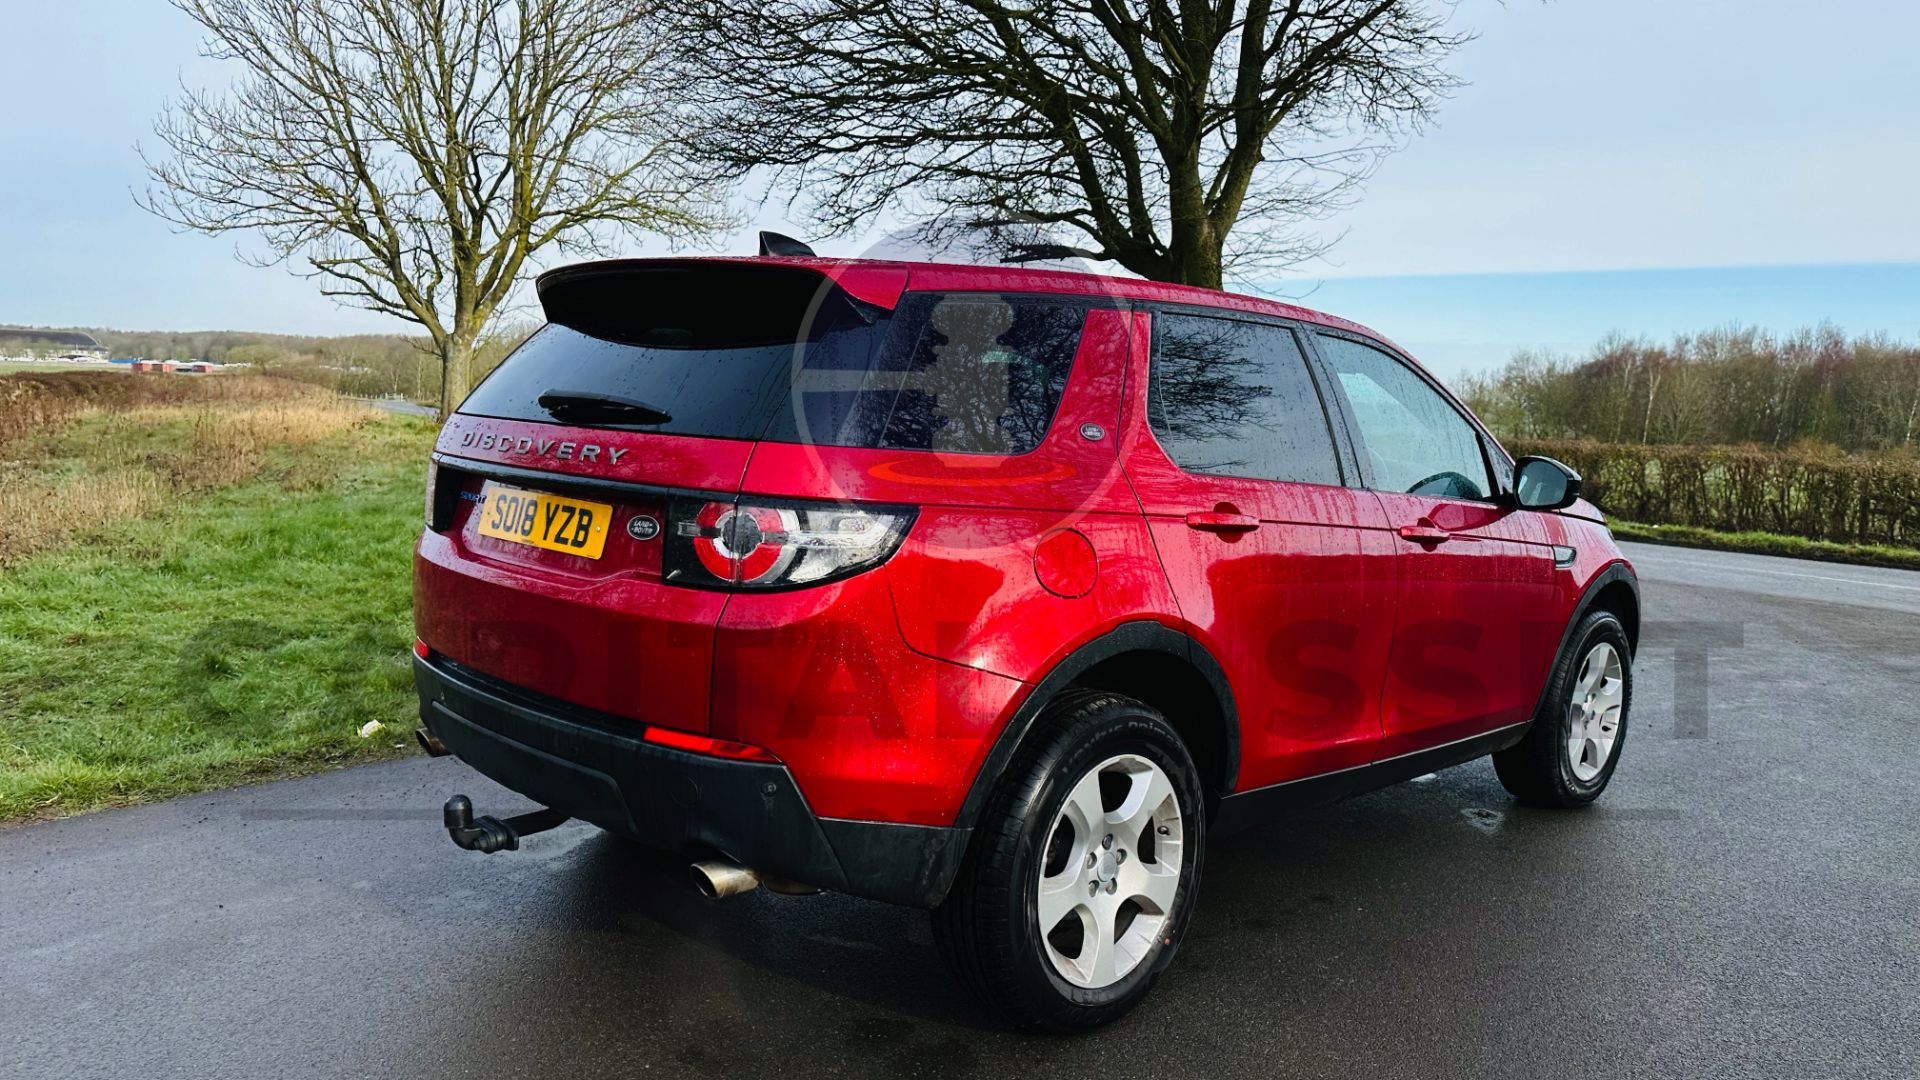 LAND ROVER DISCOVERY SPORT *PURE SPECIAL EDITION* SUV (2018 - EURO 6) 2.0 TD4 - AUTO STOP/START - Image 12 of 48